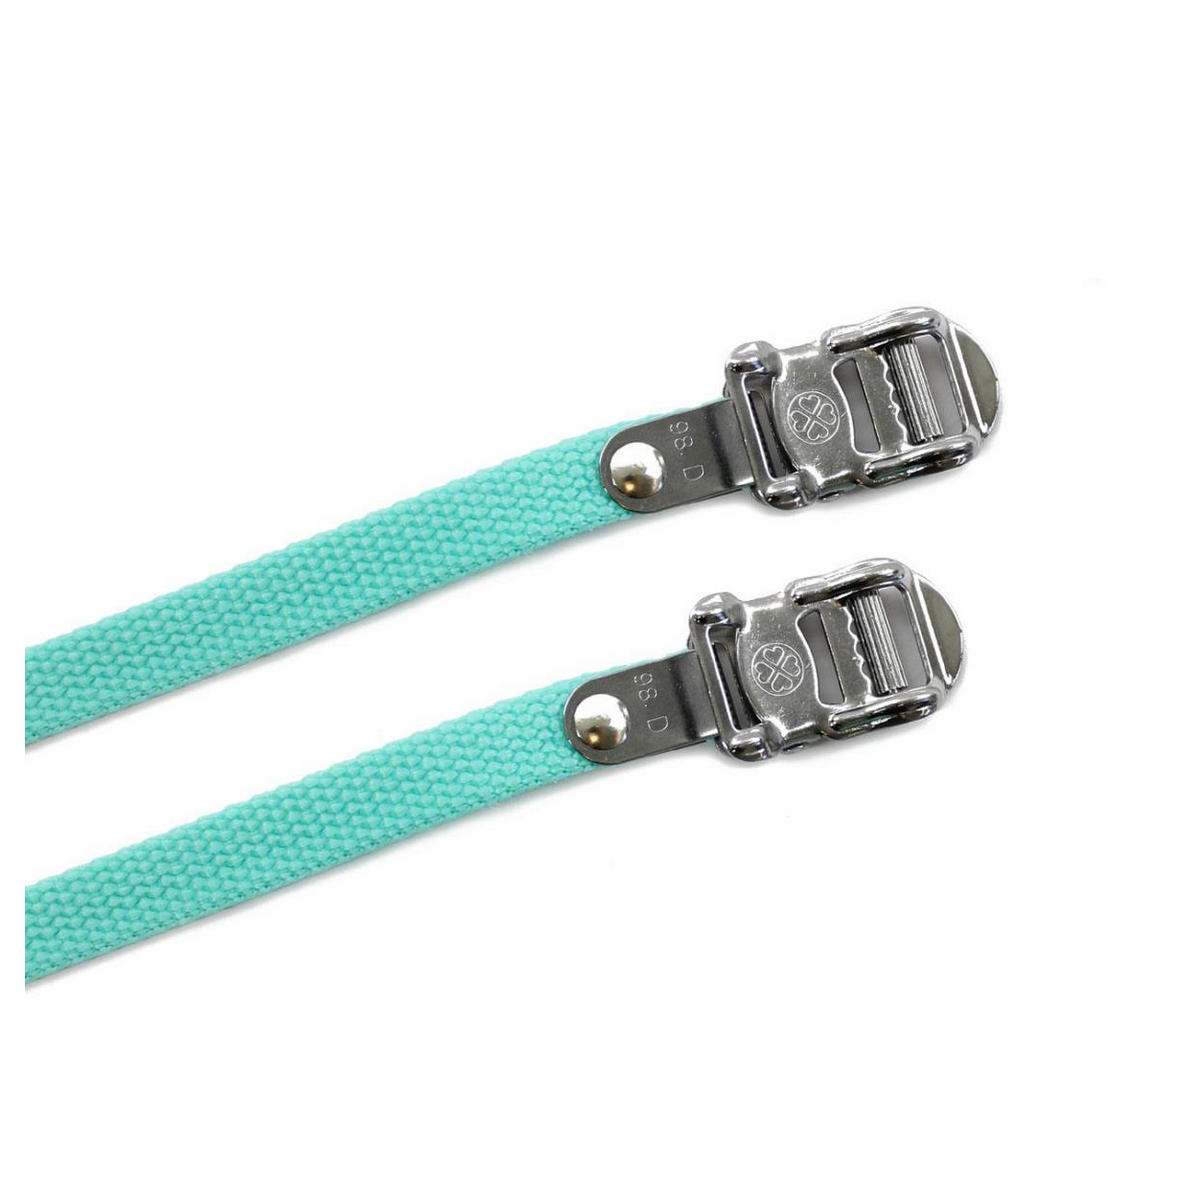 Couple of strap for foot-rest, green